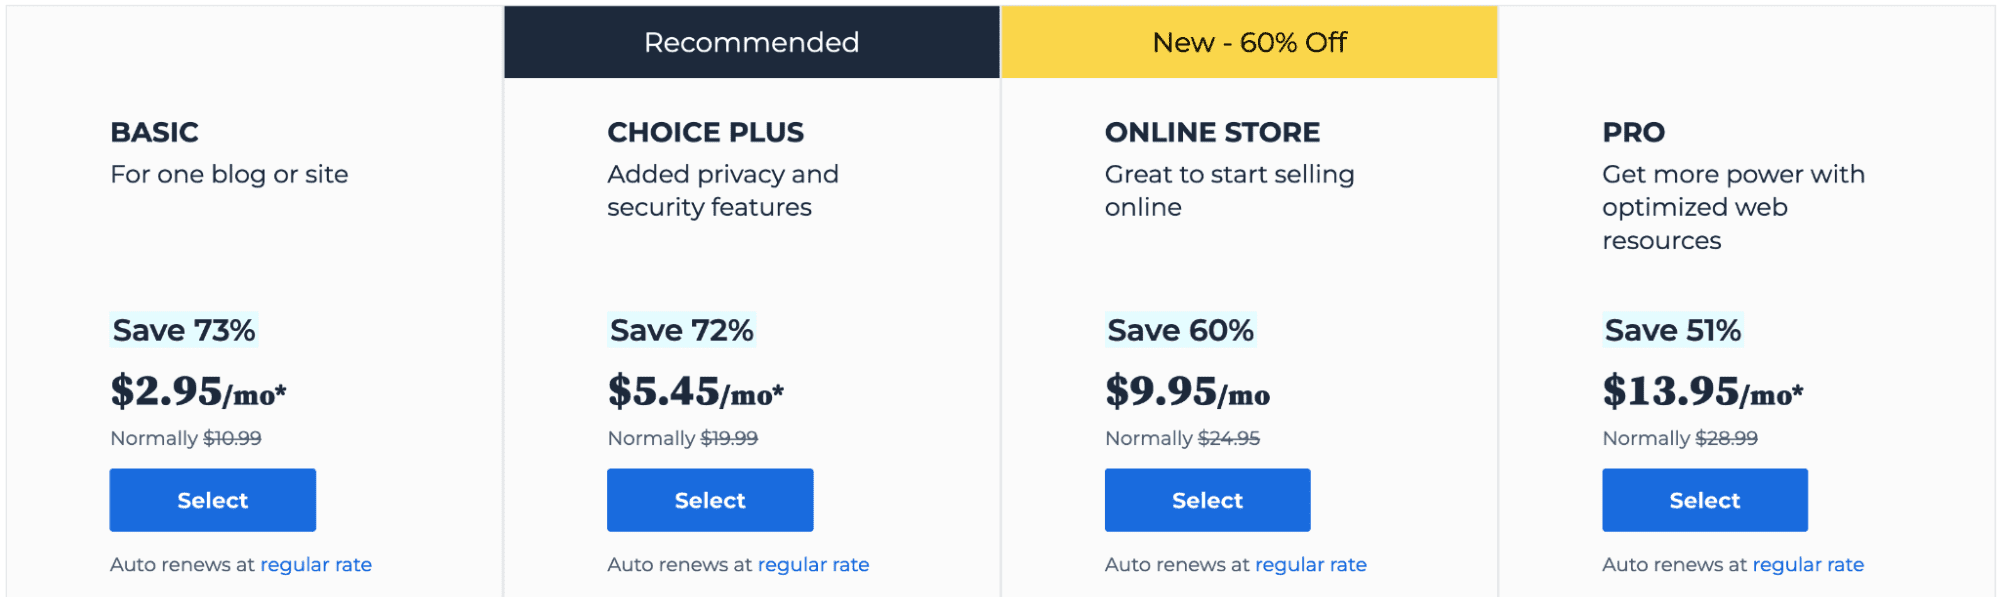 Bluehost Hosting Plans and Pricing